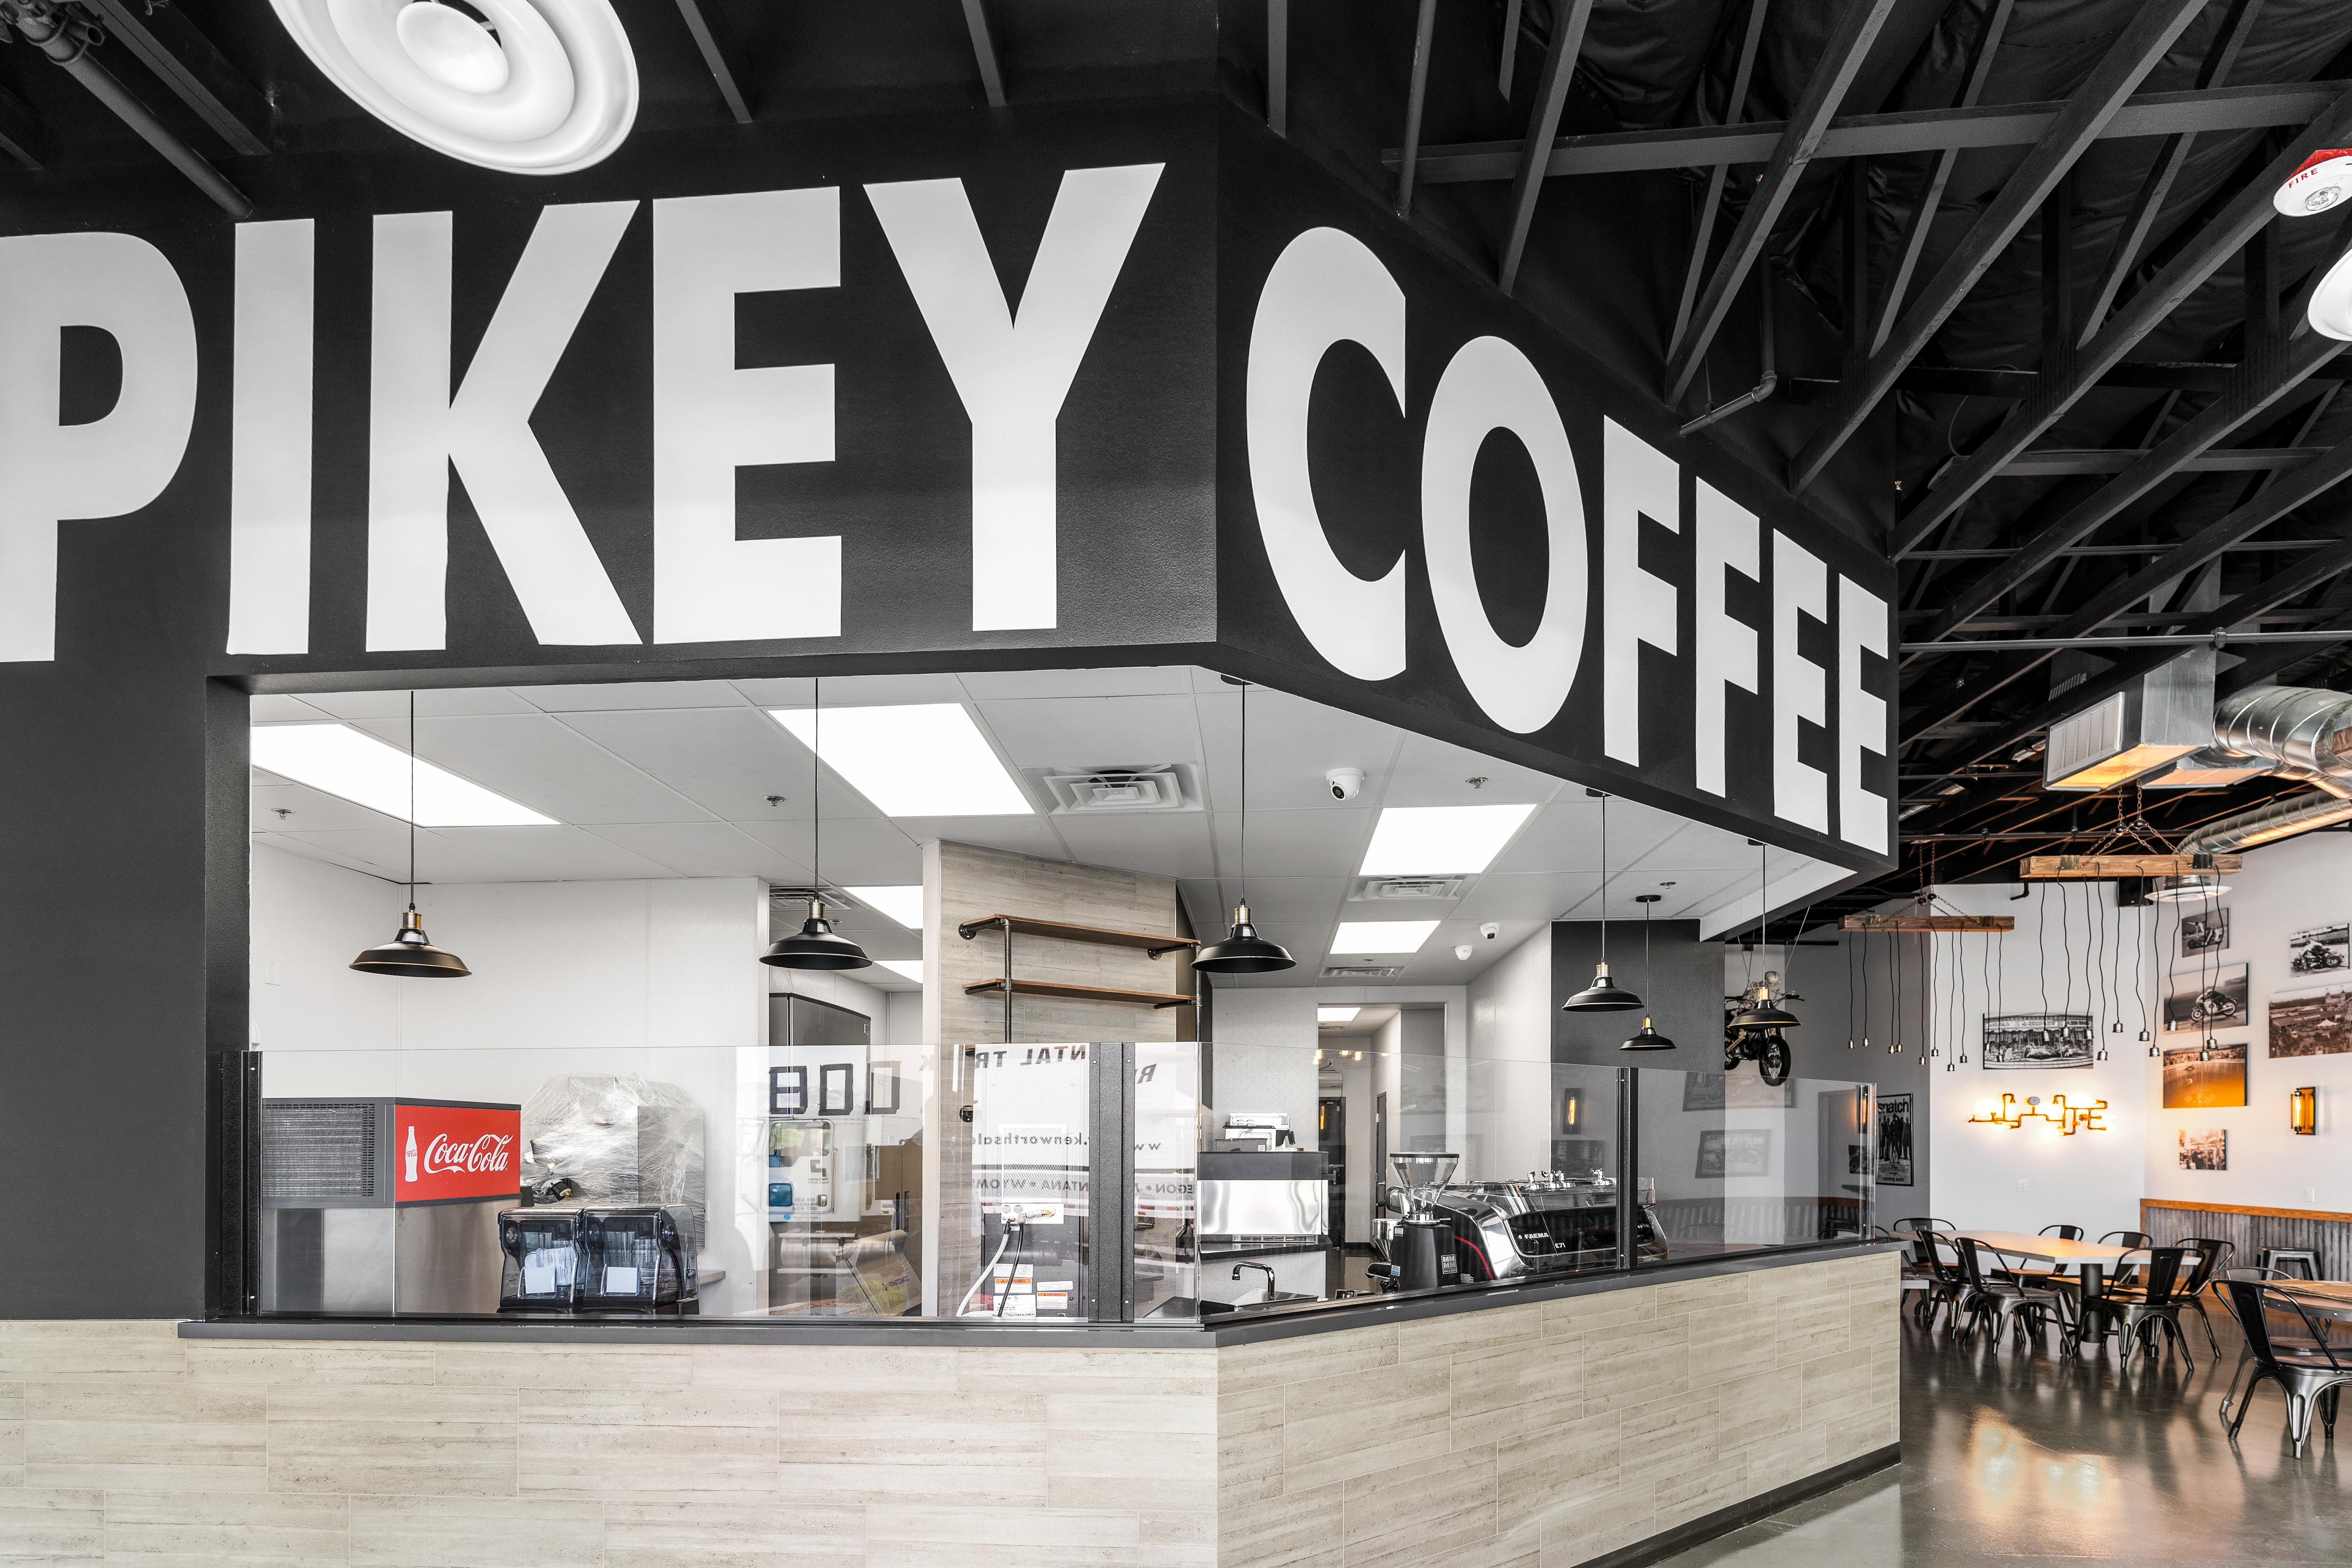 Kalb Industries completed an restaurant tenant improvement for Pikey Coffee Co.